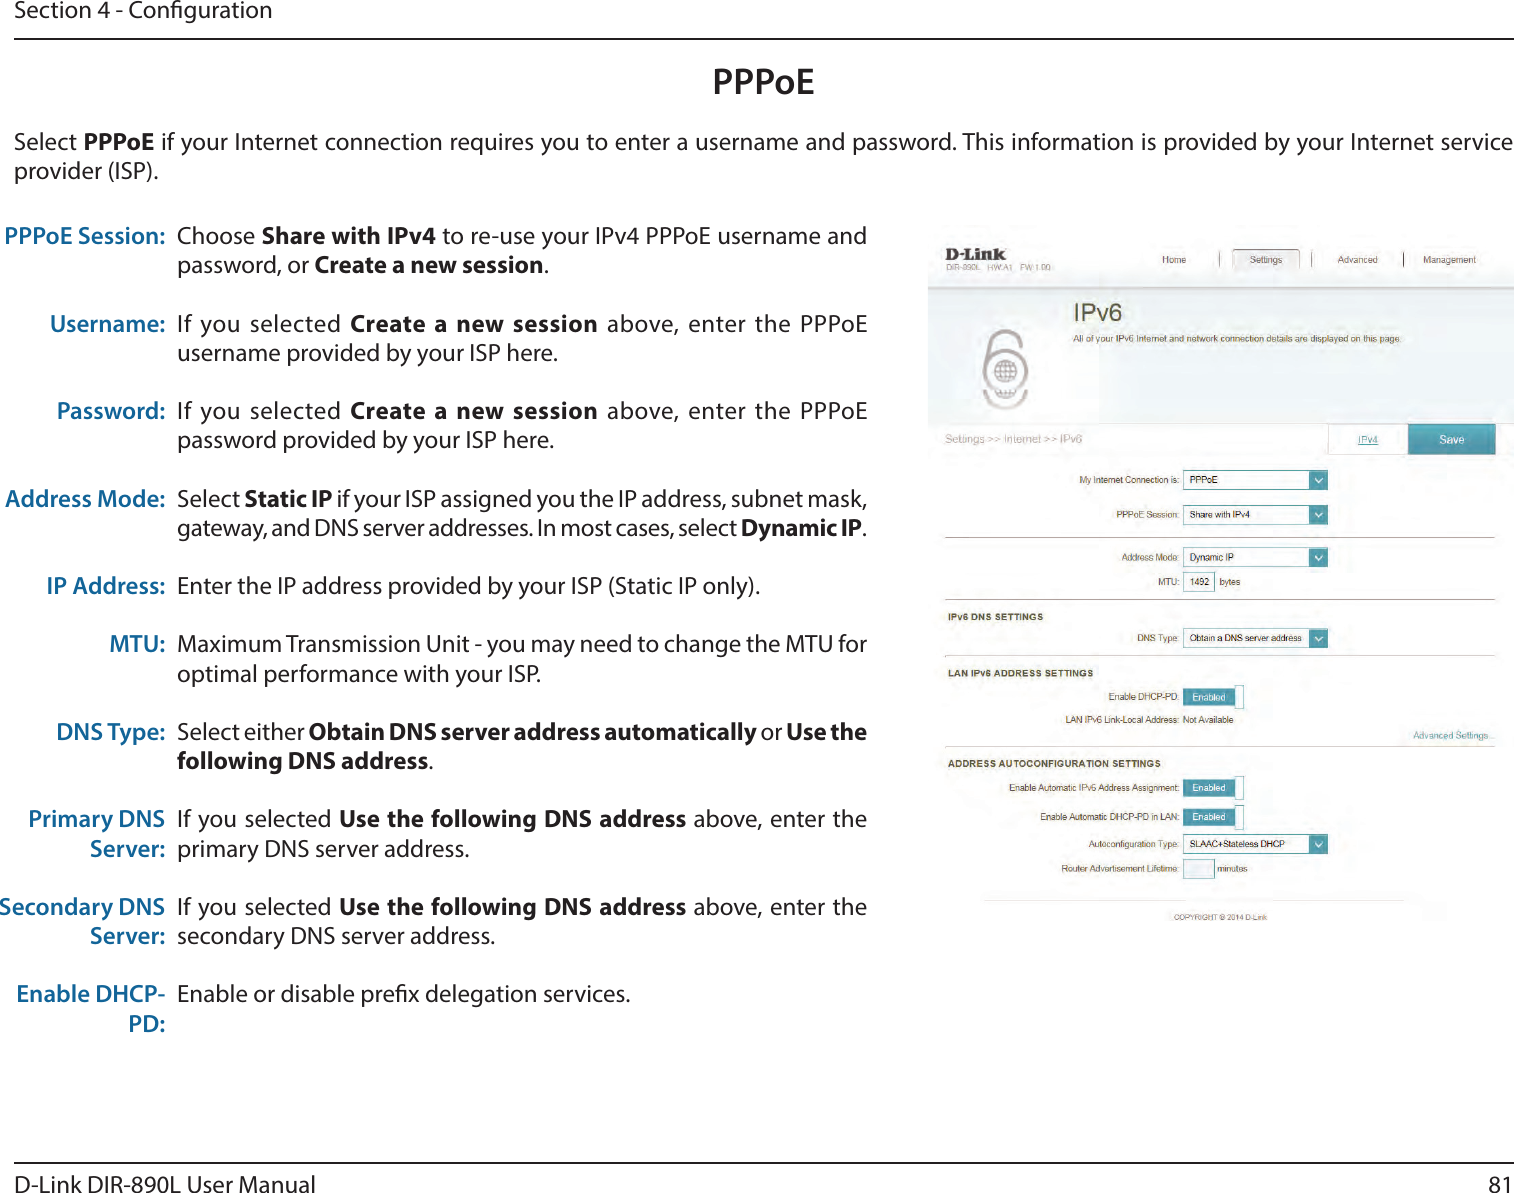 81D-Link DIR-890L User ManualSection 4 - CongurationPPPoEChoose Share with IPv4 to re-use your IPv4 PPPoE username and password, or Create a new session.If you selected Create a new session above, enter the PPPoE username provided by your ISP here.If you selected Create a new session above, enter the PPPoE password provided by your ISP here.Select Static IP if your ISP assigned you the IP address, subnet mask, gateway, and DNS server addresses. In most cases, select Dynamic IP.Enter the IP address provided by your ISP (Static IP only).Maximum Transmission Unit - you may need to change the MTU for optimal performance with your ISP.Select either Obtain DNS server address automatically or Use the following DNS address.If you selected Use the following DNS address above, enter the primary DNS server address. If you selected Use the following DNS address above, enter the secondary DNS server address.Enable or disable prex delegation services.PPPoE Session:Username:Password:Address Mode:IP Address:MTU:DNS Type:Primary DNS Server:Secondary DNS Server:Enable DHCP-PD:Select PPPoE if your Internet connection requires you to enter a username and password. This information is provided by your Internet service provider (ISP).